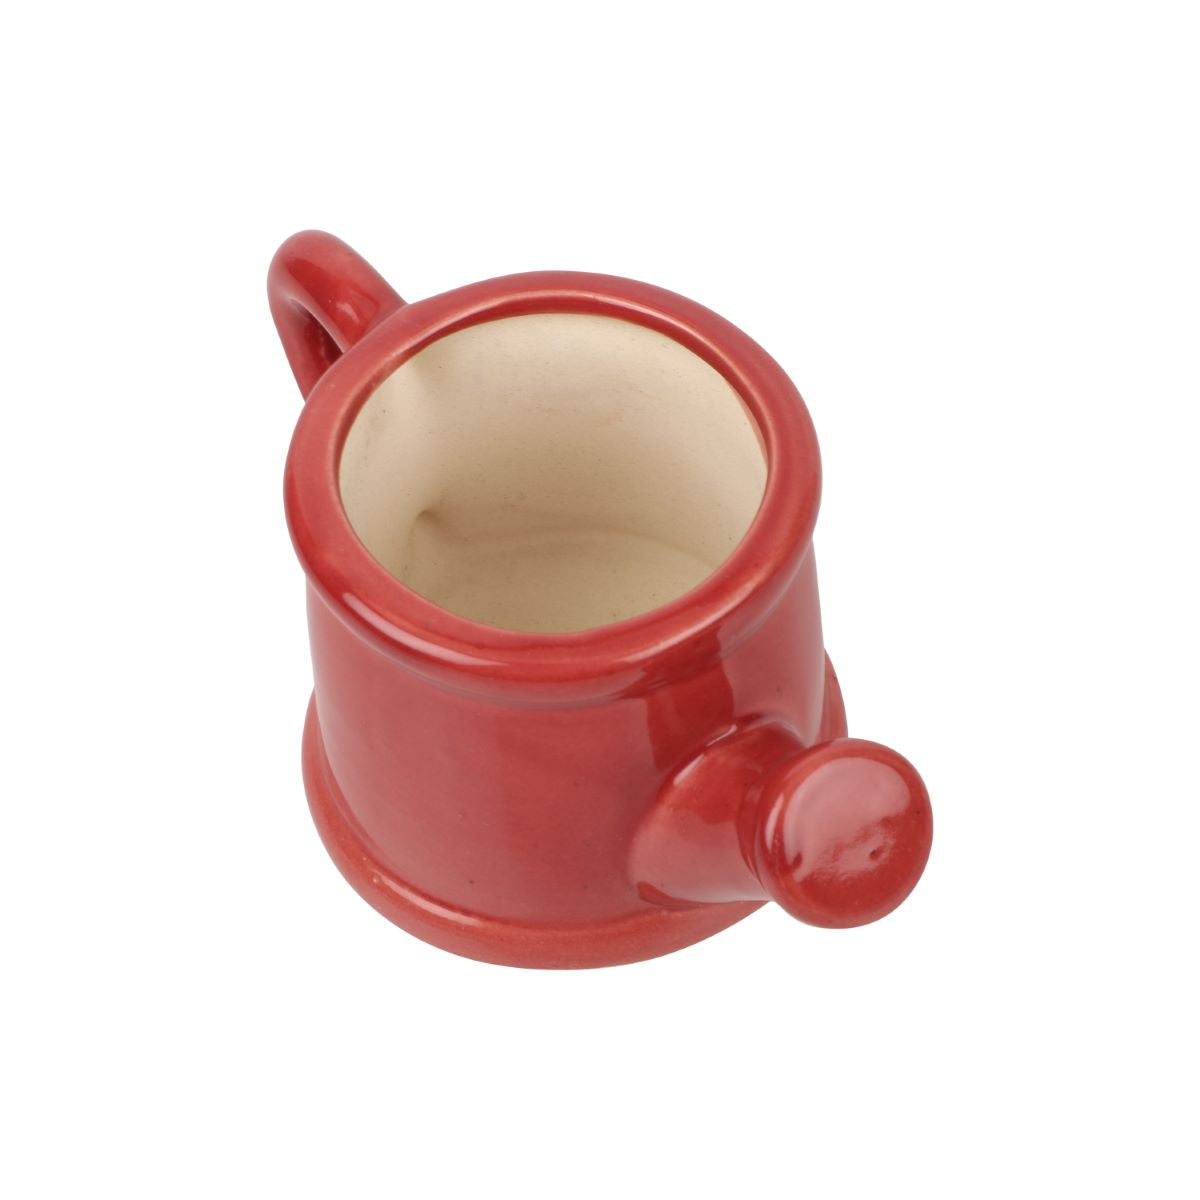 Mini Watering Can Shaped Ceramic Planter